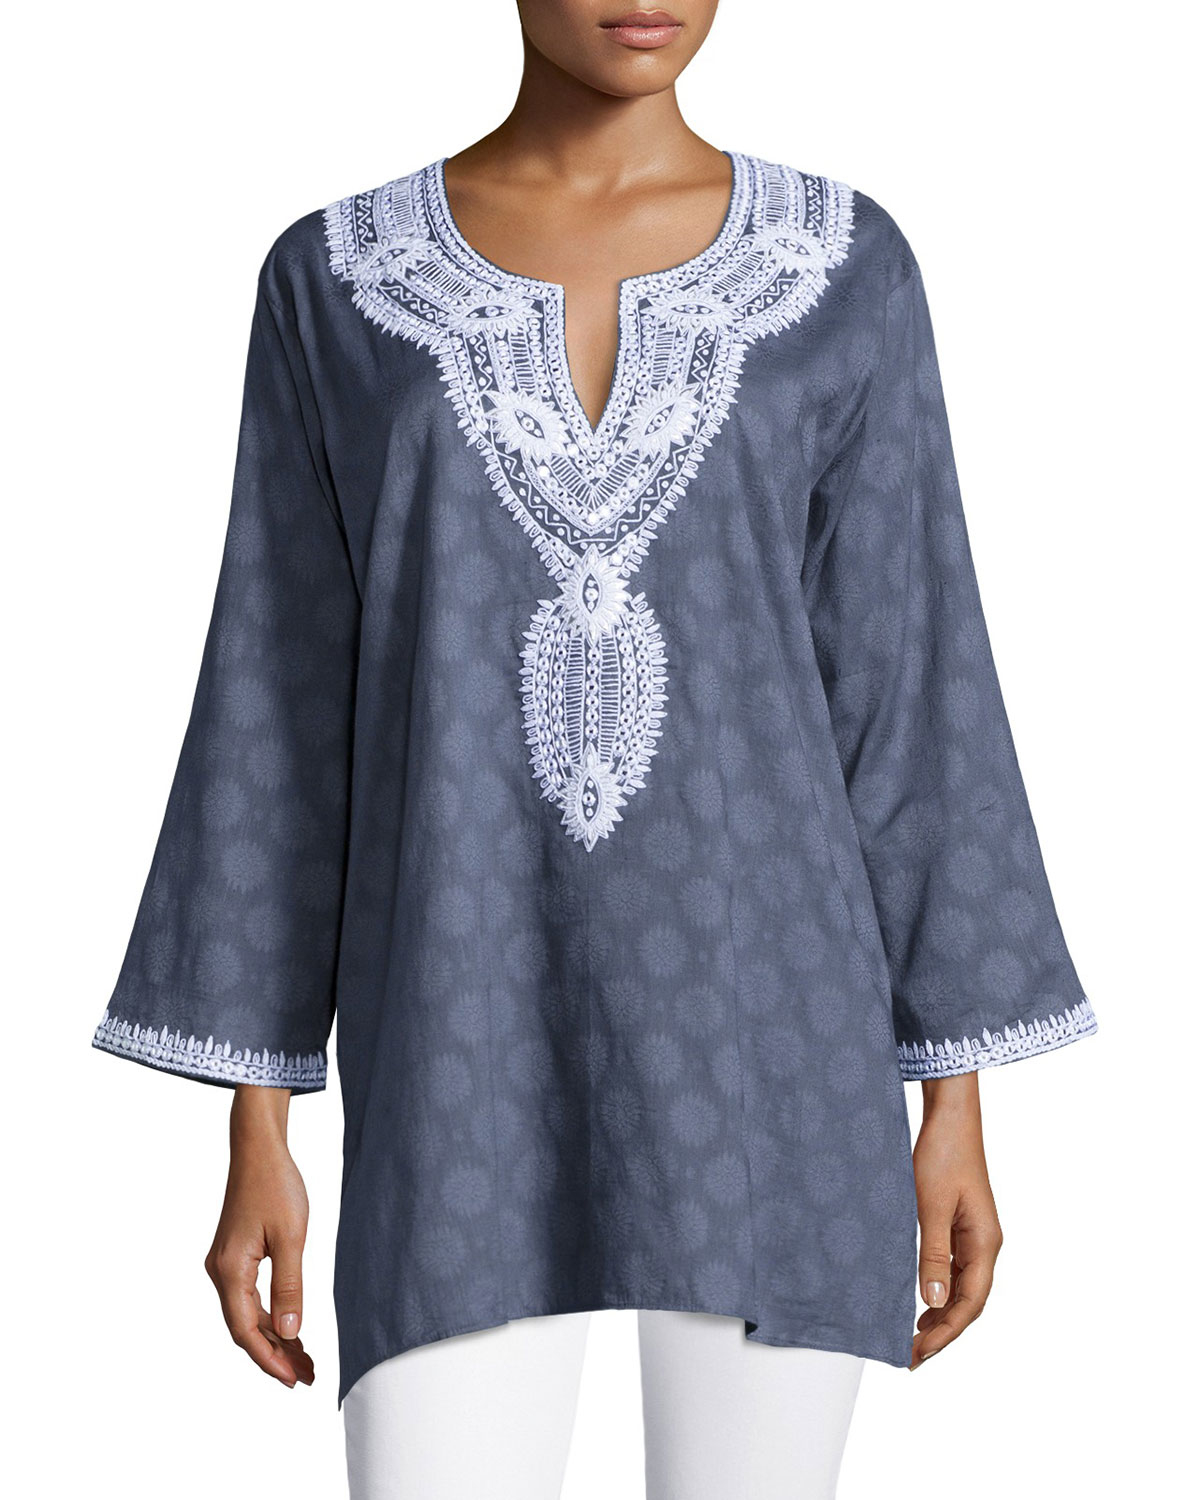 Lyst - Sulu Collection Aria Embroidered Cotton Tunic in Gray